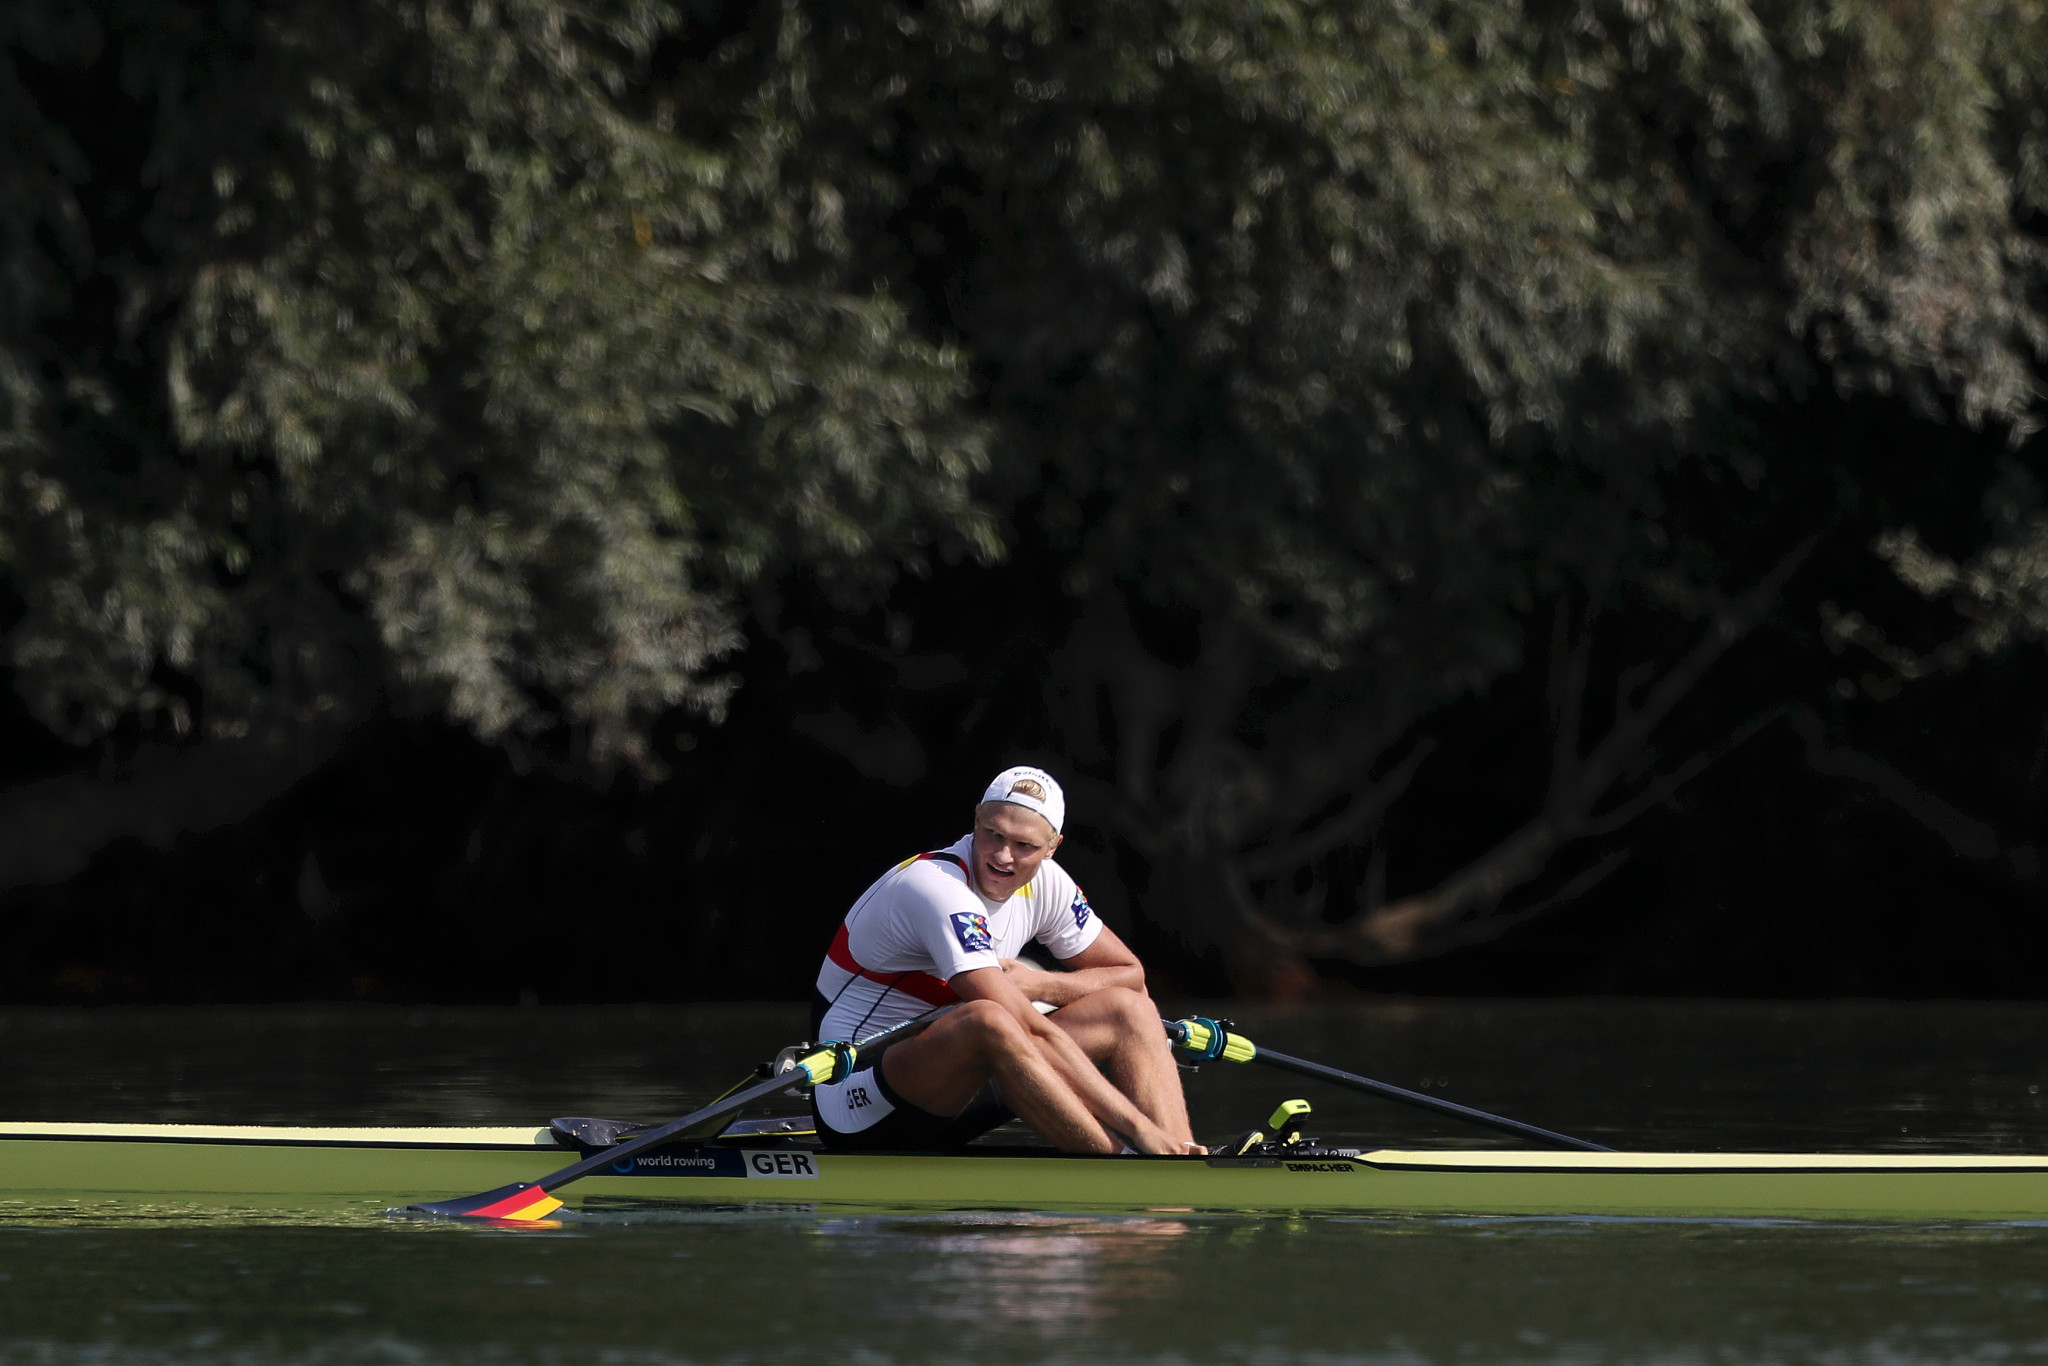 Poznan to host rescheduled European Rowing Championships in October